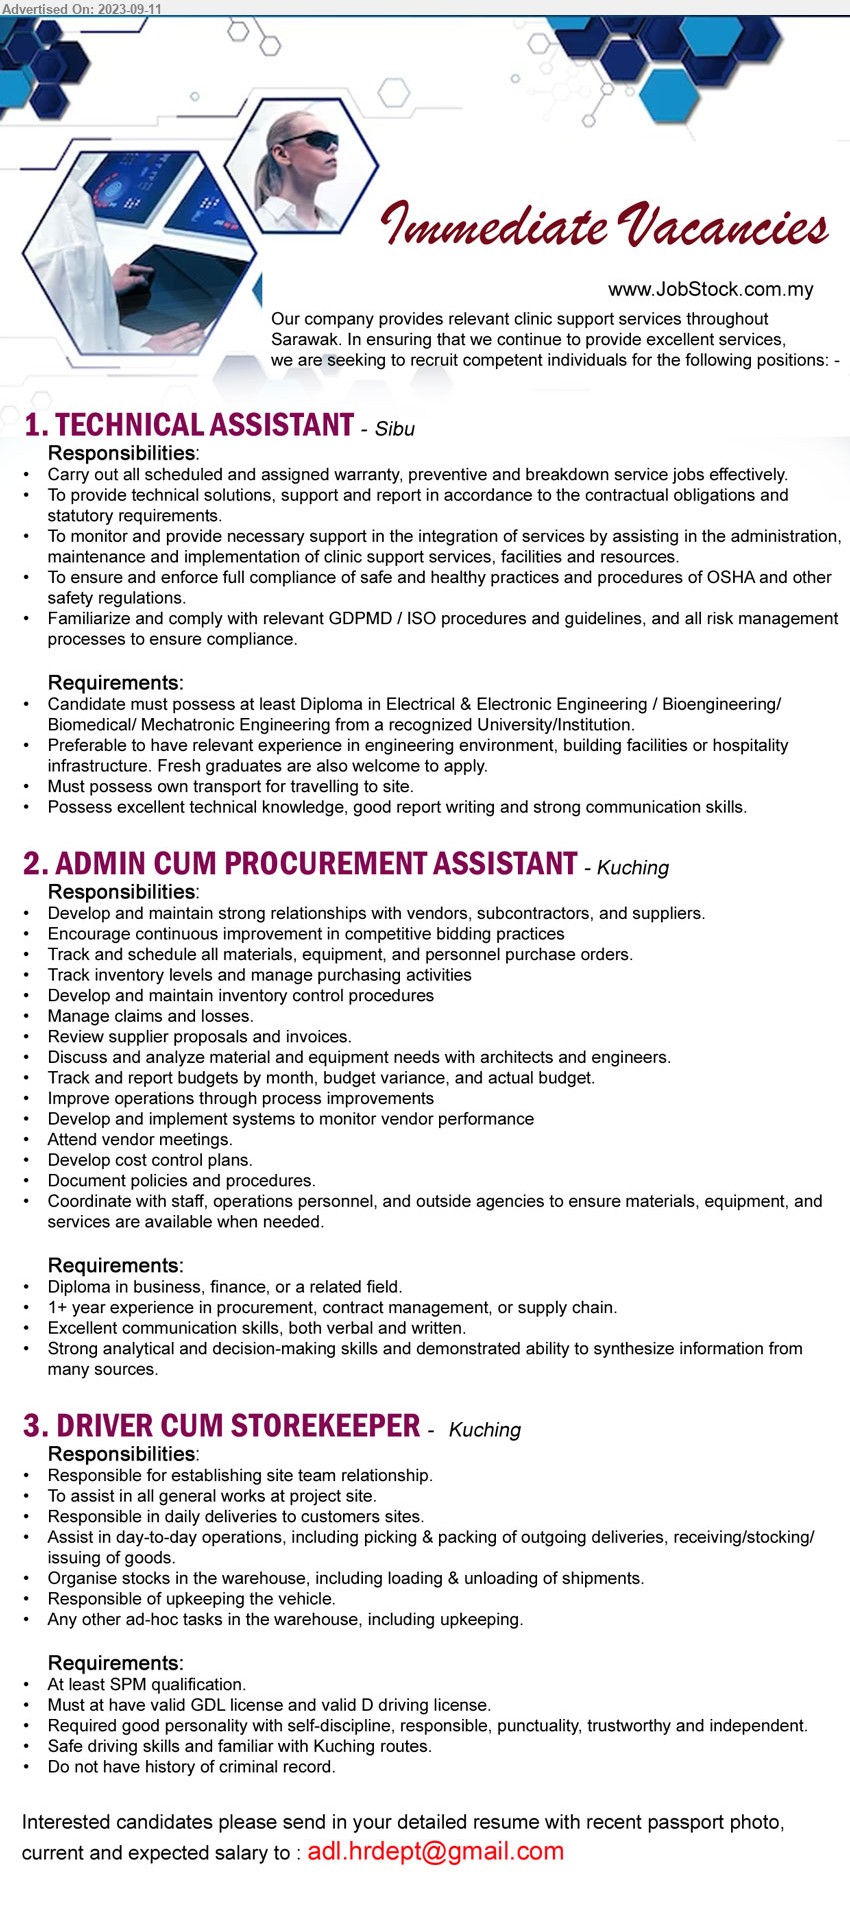 ADVERTISER - 1. TECHNICAL ASSISTANT (Sibu), Diploma in Electrical & Electronic Engineering / Bioengineering/ Biomedical/ Mechatronic Engineering from a recognized University/Institution.,...
2. ADMIN CUM PROCUREMENT ASSISTANT  (Kuching), Diploma in business, finance, 1+ year experience in procurement, contract management, or supply chain.,...
3. DRIVER CUM STOREKEEPER (Kuching), SPM, Must at have valid GDL license and valid D driving license. ,...
Email resume to ...